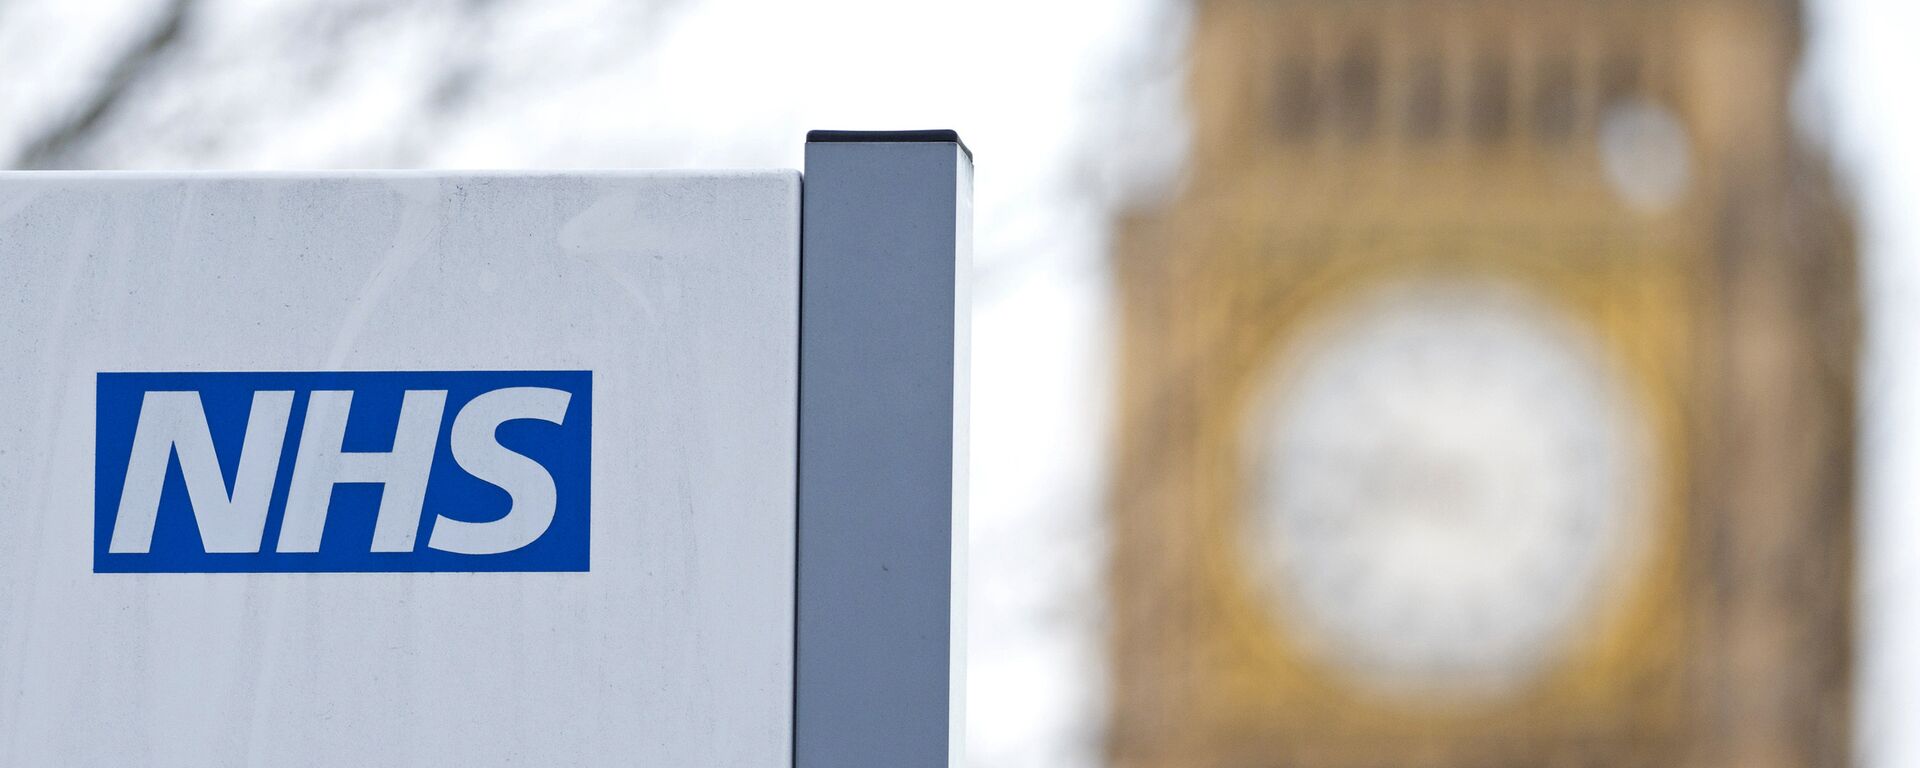 An NHS sign is pictured at St Thomas' Hospital in front of the Big Ben clock face and the Elizabeth Tower on January 13, 2017 in London.  - Sputnik International, 1920, 25.02.2021